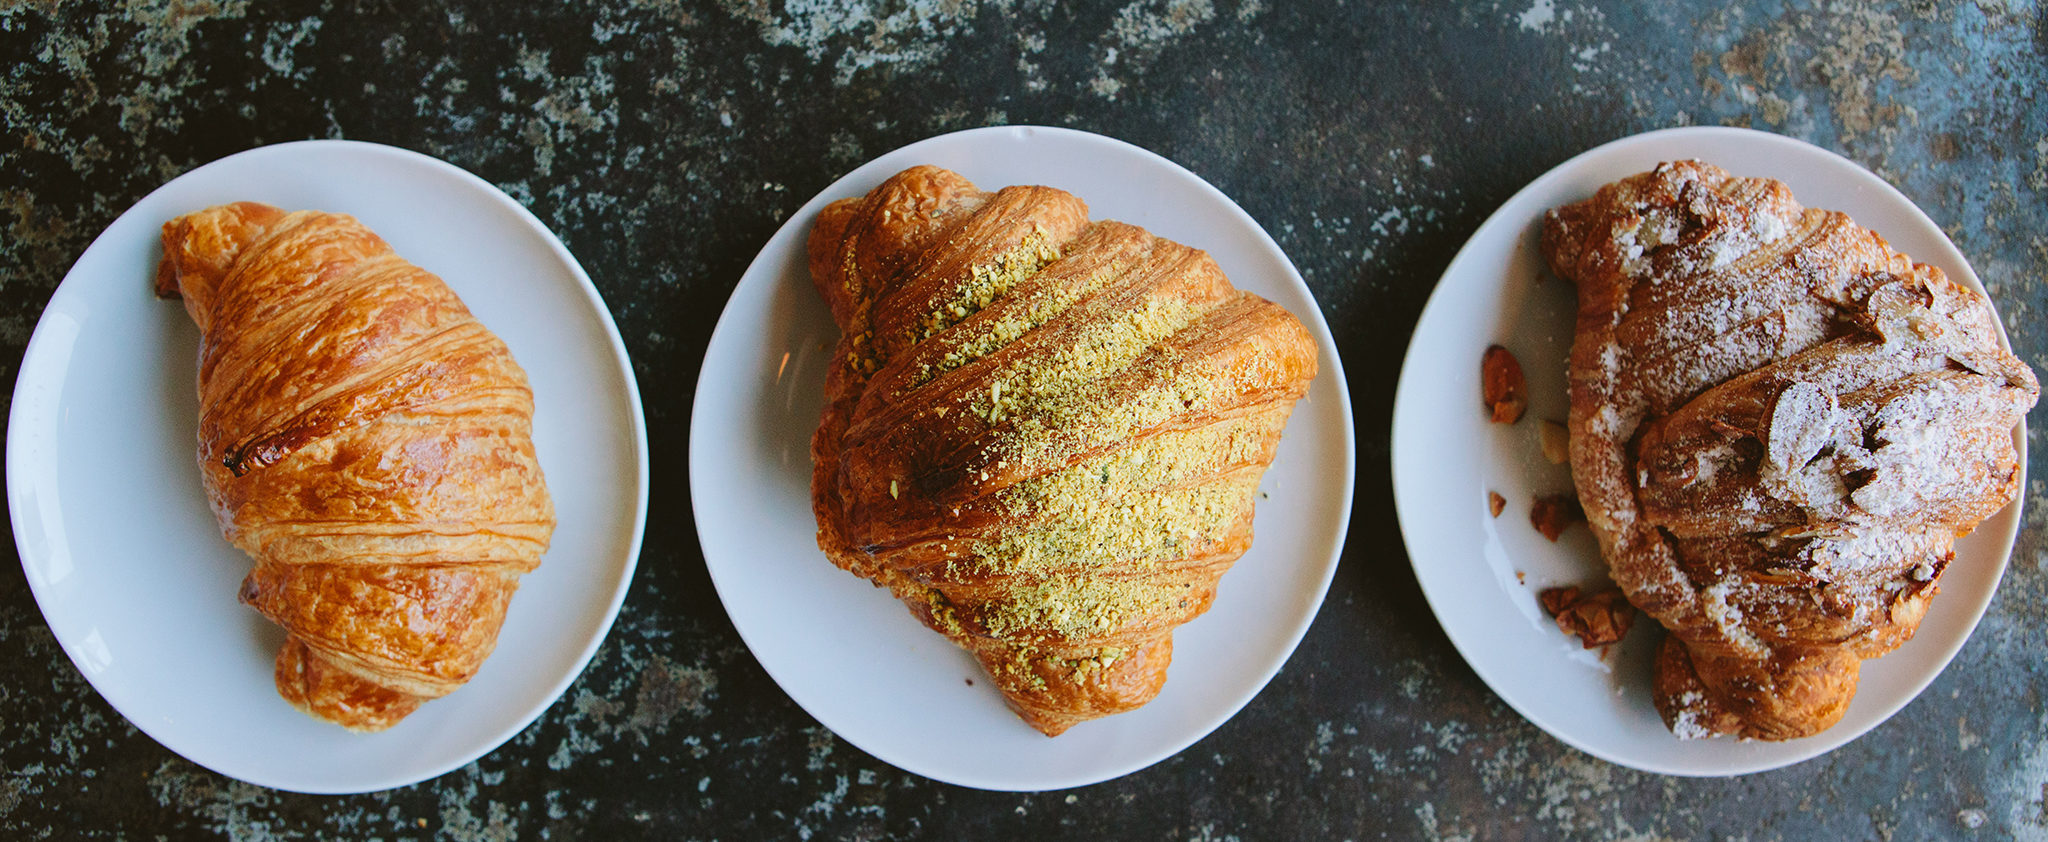 Croissants from Tatte Bakery & Cafe